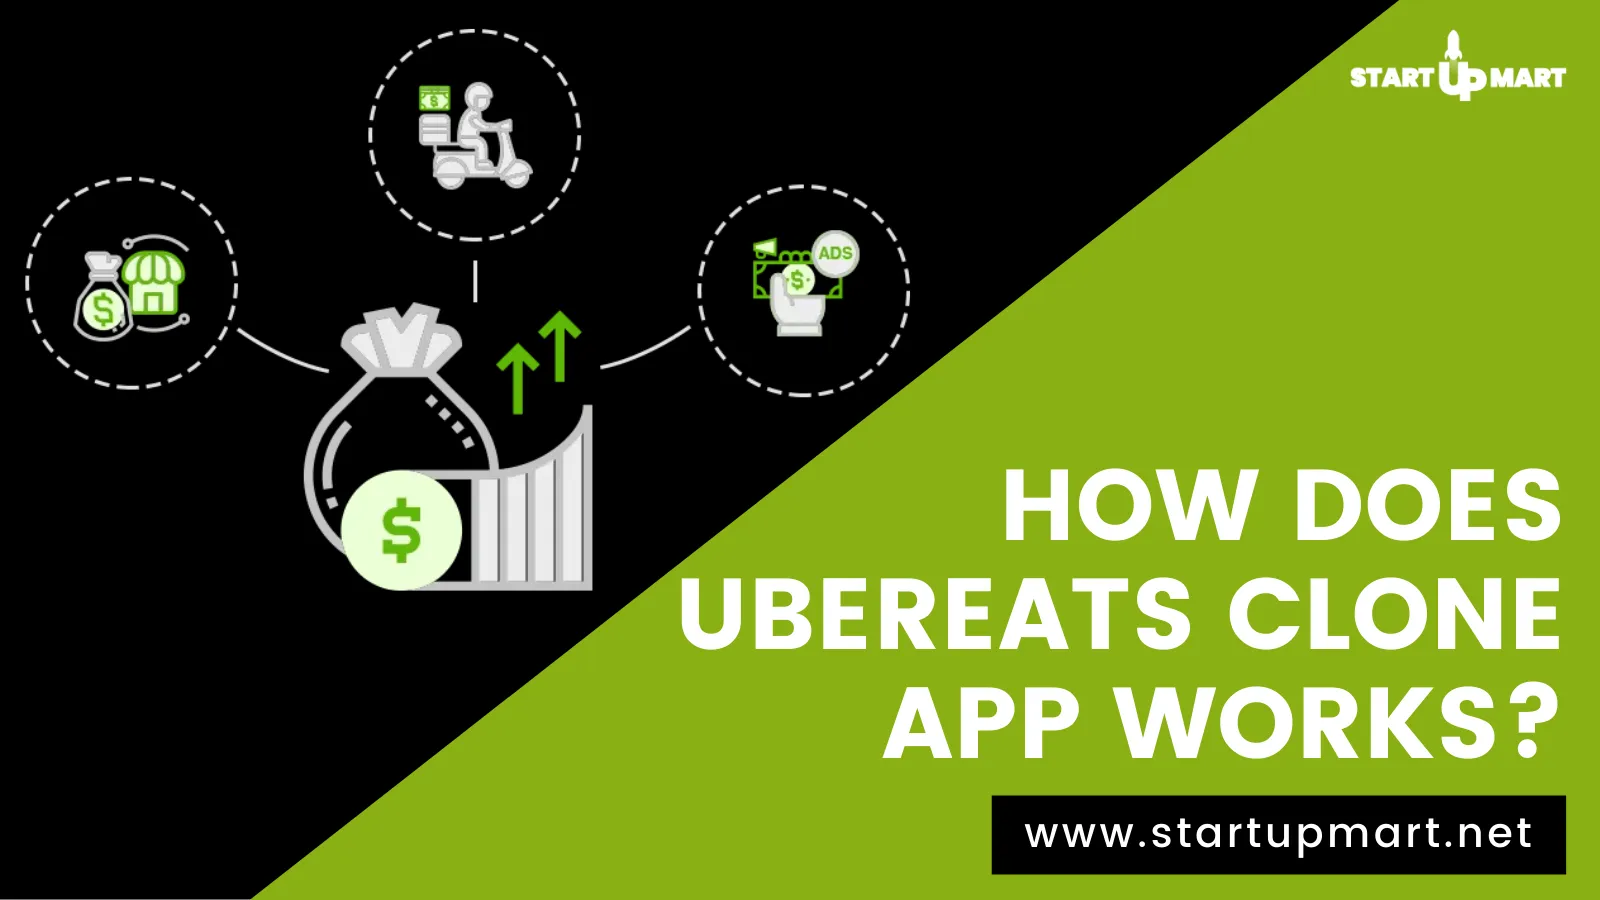 How Does The UberEats Clone App Works?